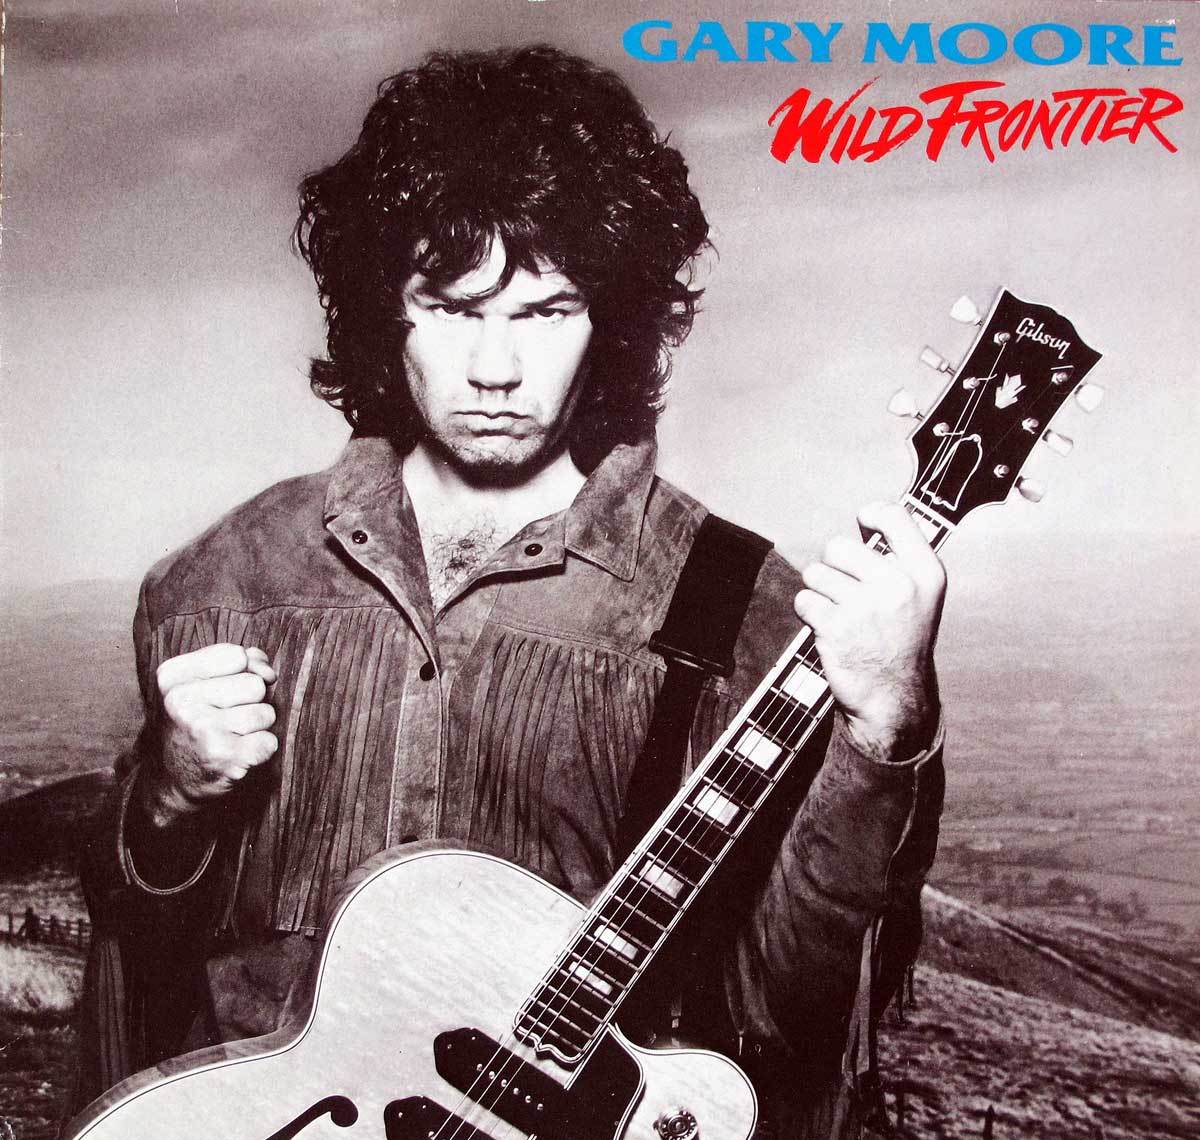 Front cover Photo of Gary Moore Wild Frontier https://vinyl-records.nl/